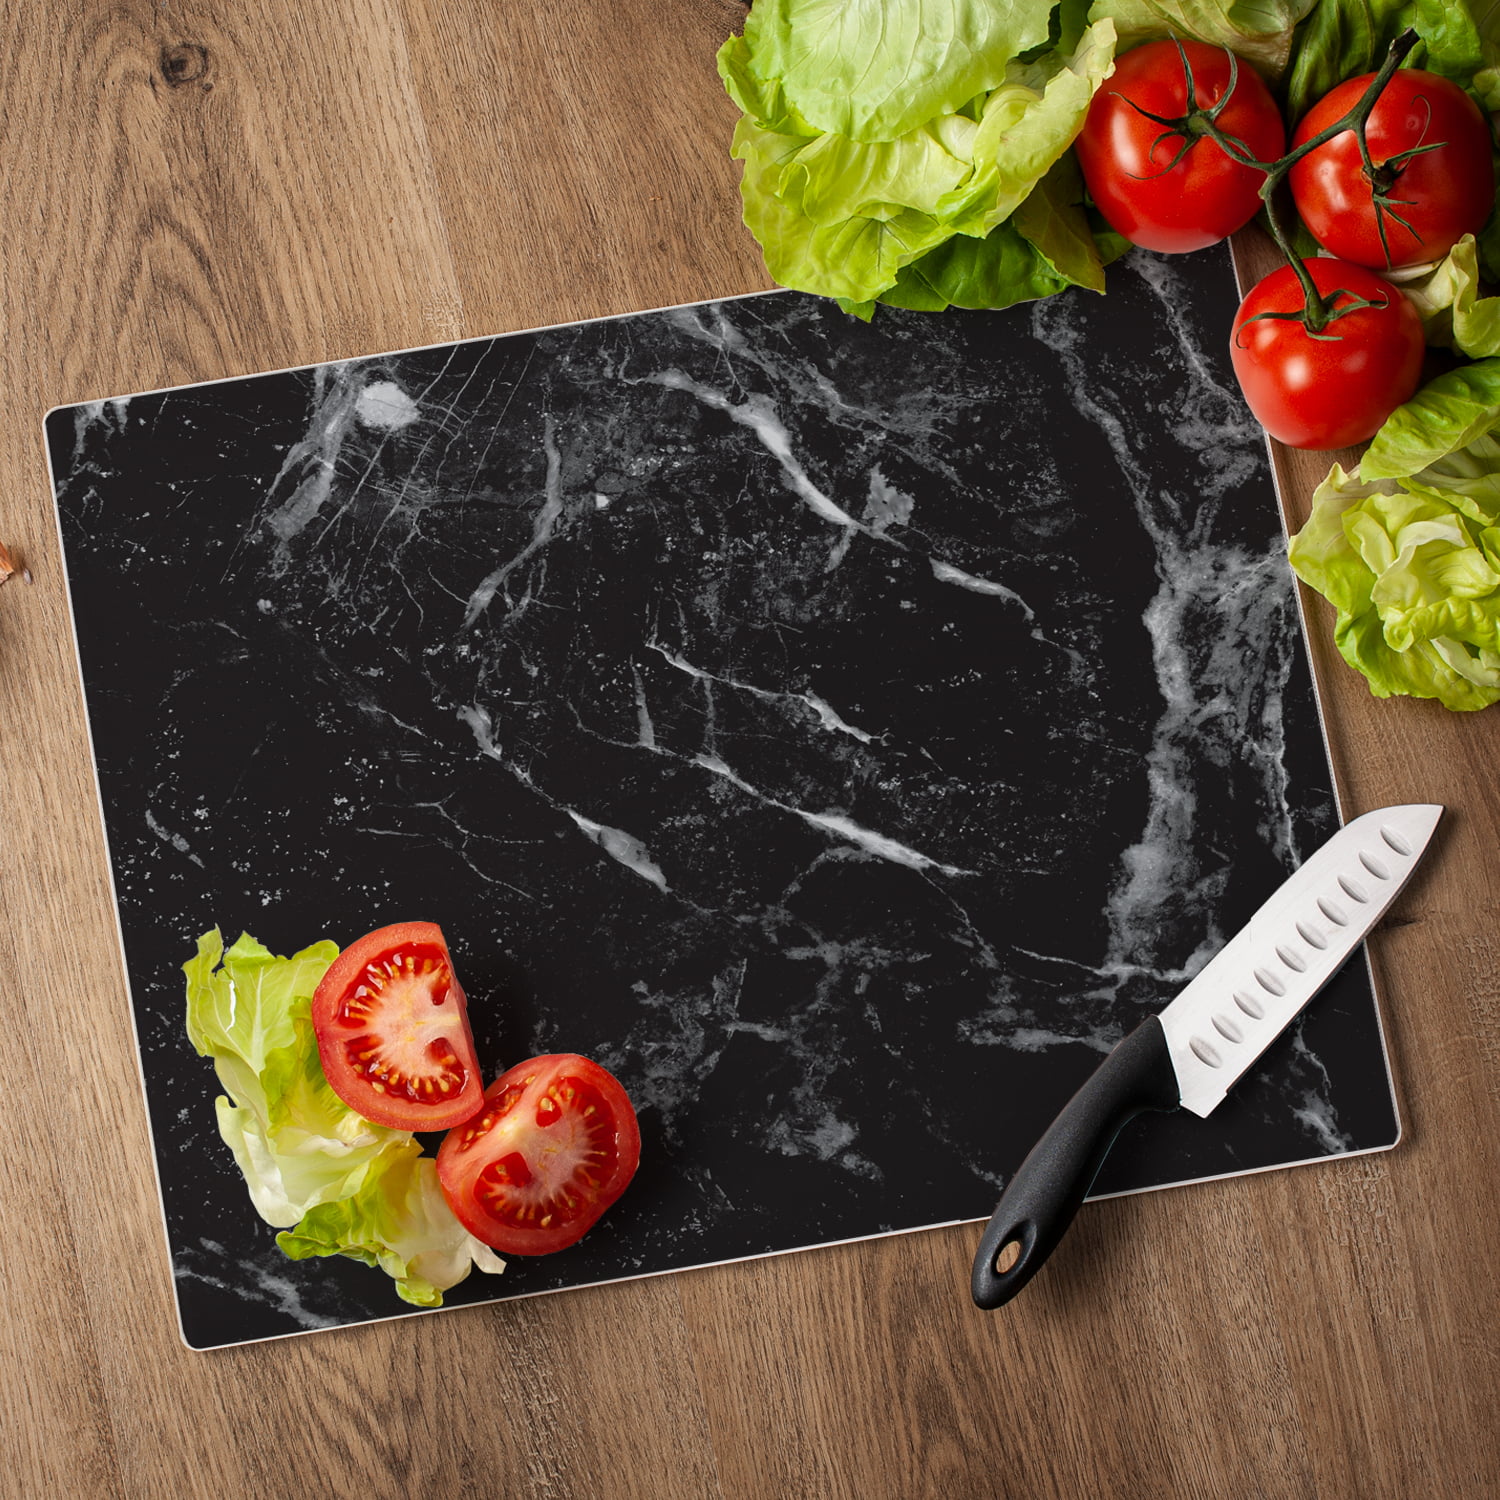 Decorative Glass Cutting Board Black Stone Look Patterned Glass